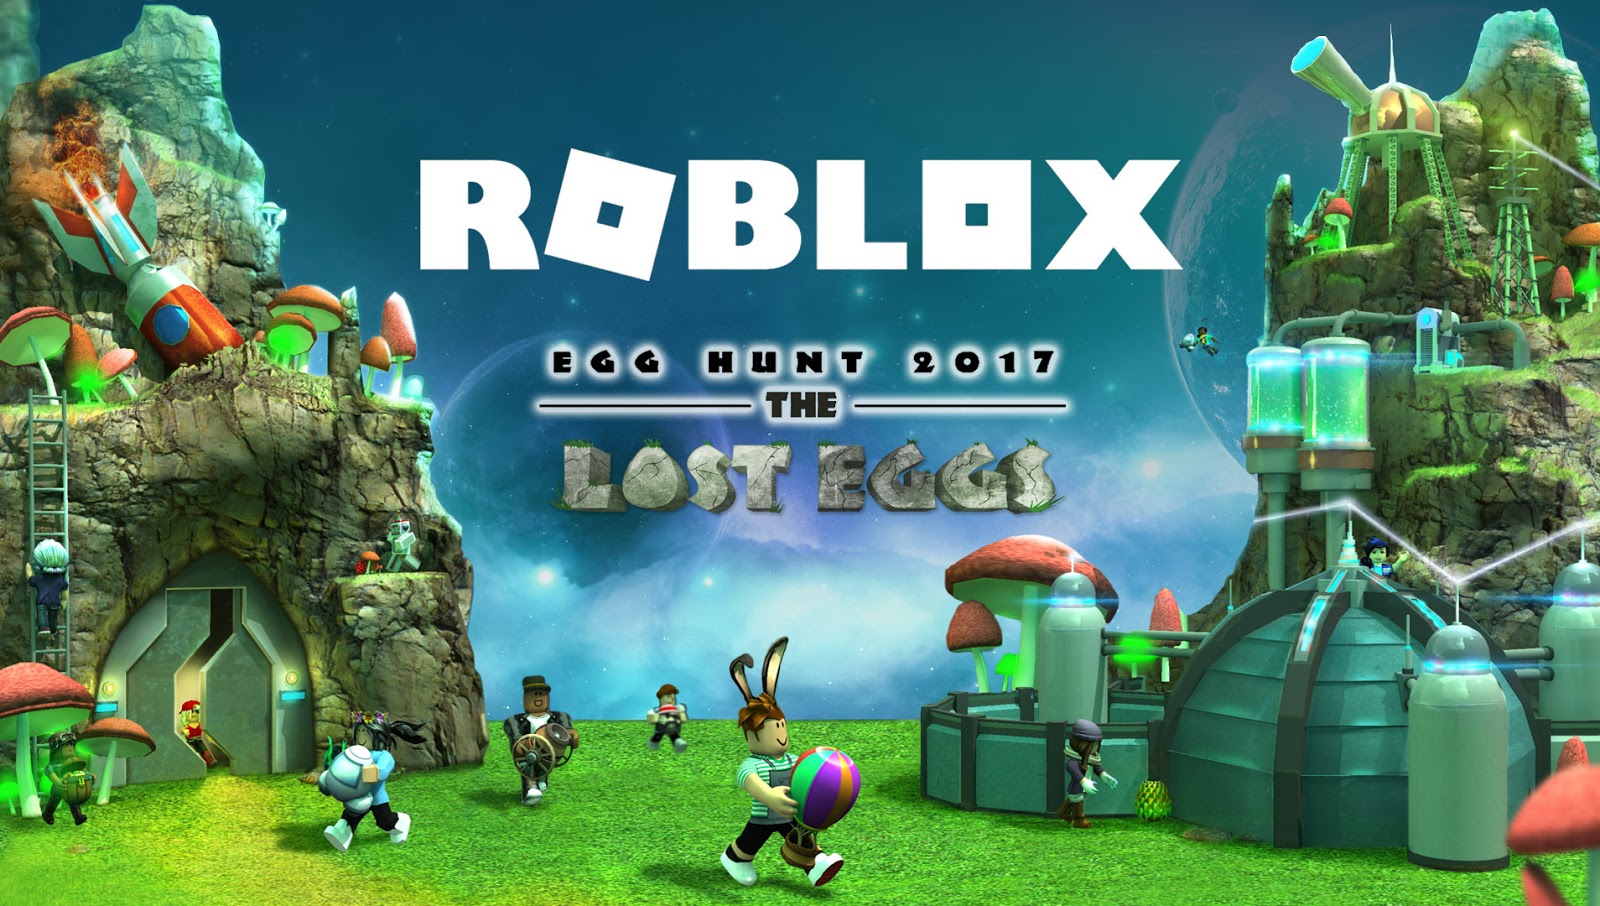 Susan S Disney Family Roblox Easter Egg Hunt Starts April 4th Your Chance To Win A Roblox Themed Easter Basket Giveaway - how to make a hunt game on roblox